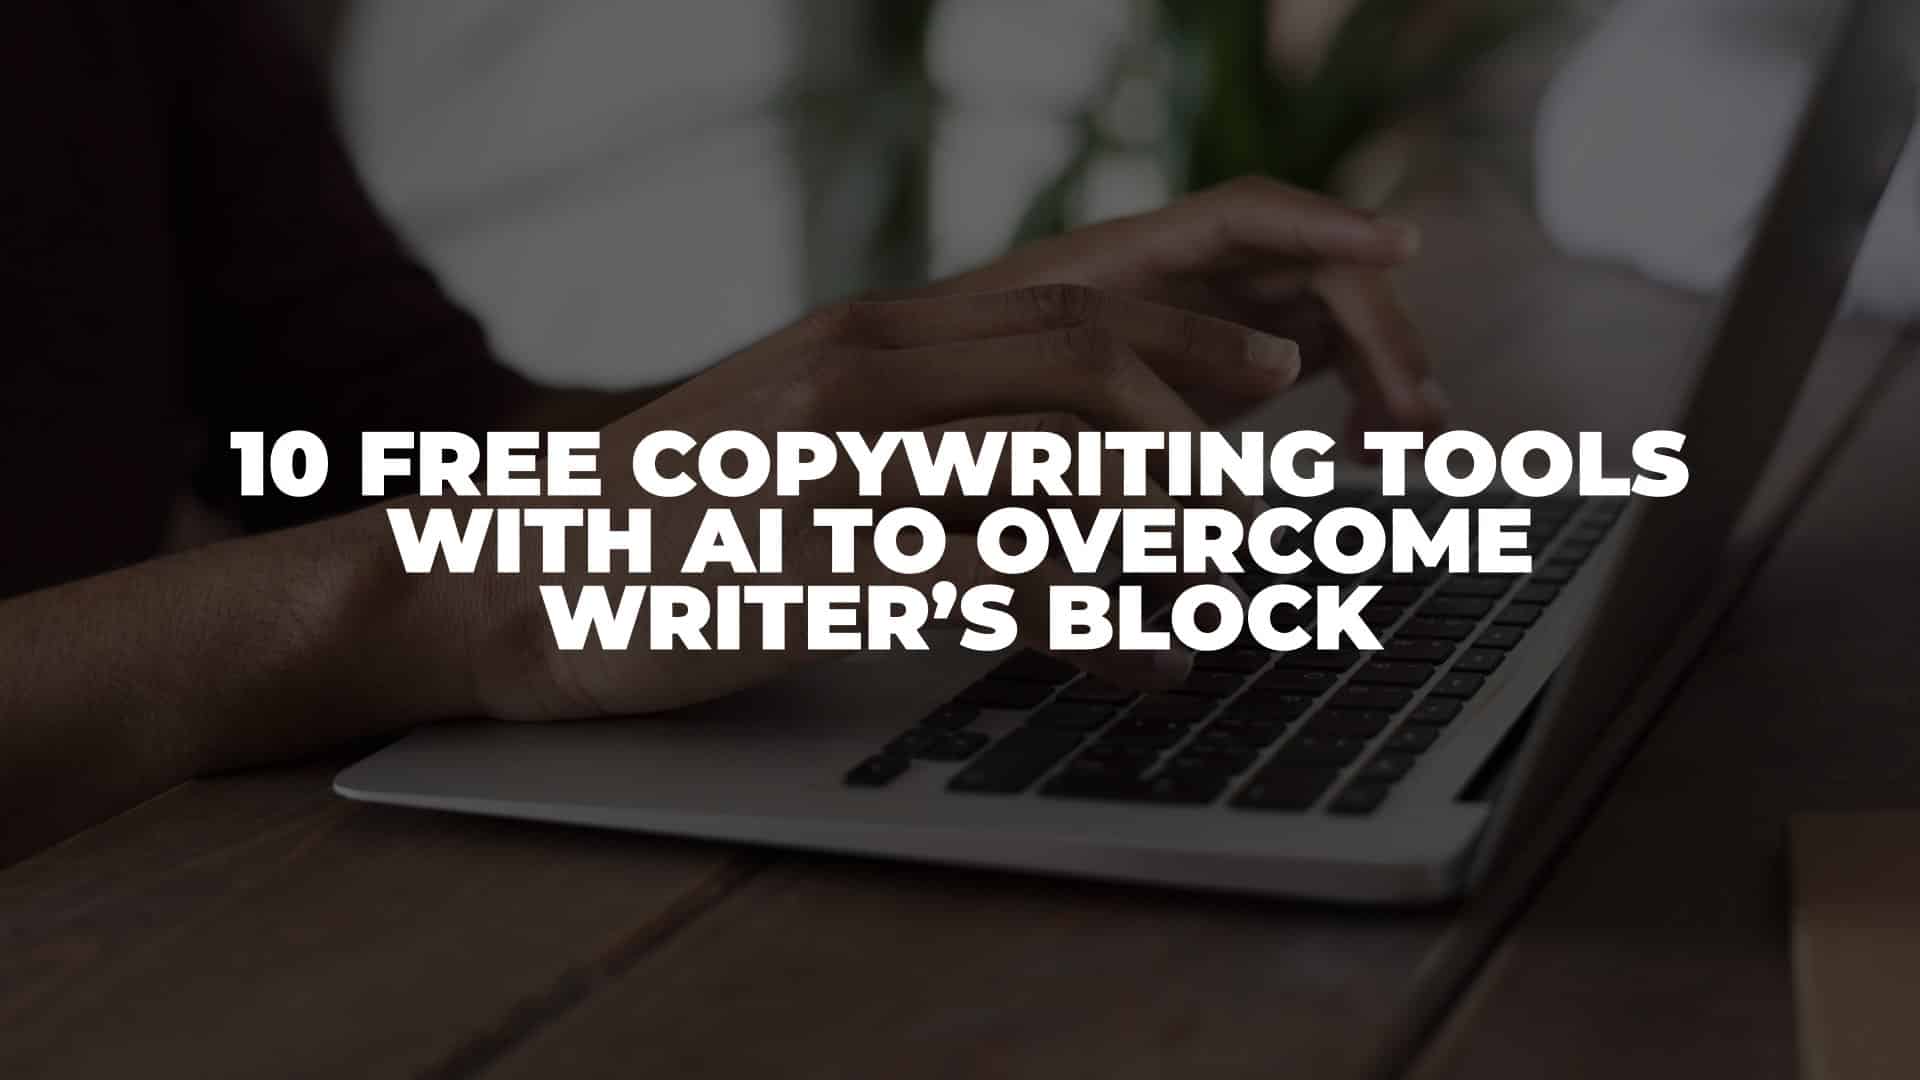 10 Free Copywriting Tools - Featured Image